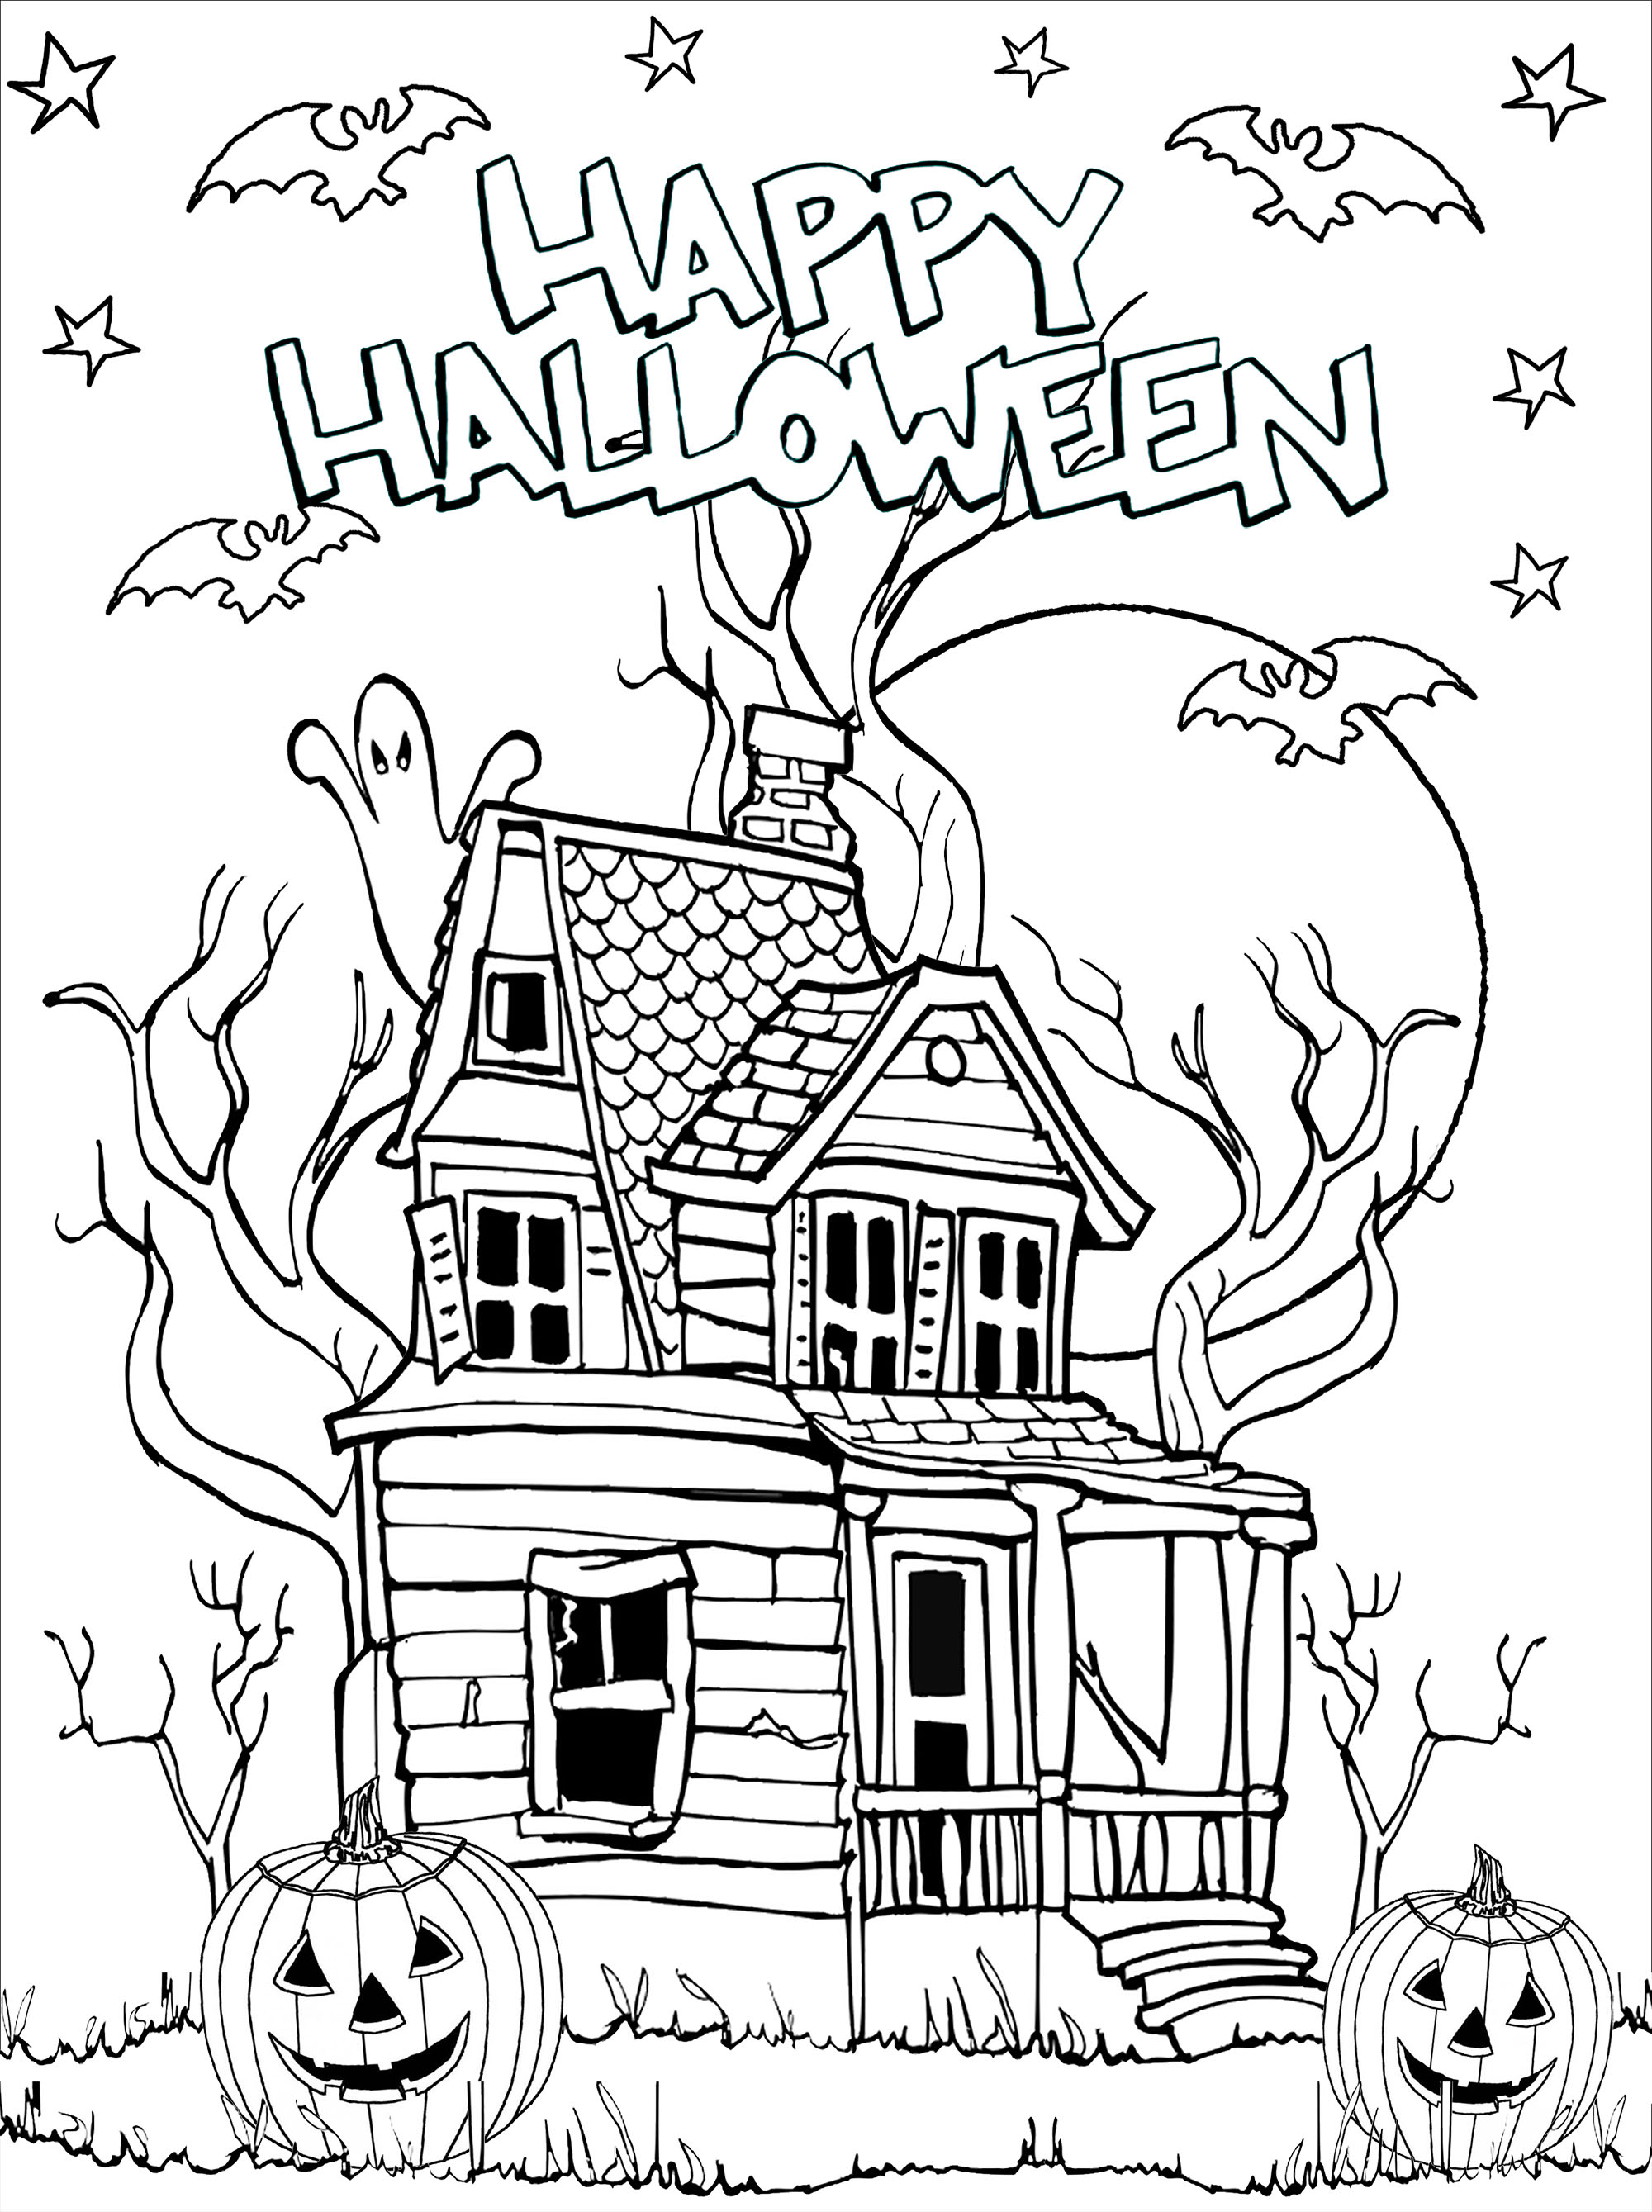 Haunted house coloring pages with pumpkins (Jack-o'-lantern), bats, moon and stars. Spooky details make this haunted house very realistic.Bats fly in the sky, adding to the mystical atmosphere of the house. The moon and stars shine in the night sky, providing an even scarier setting, Artist : Art. Isabelle